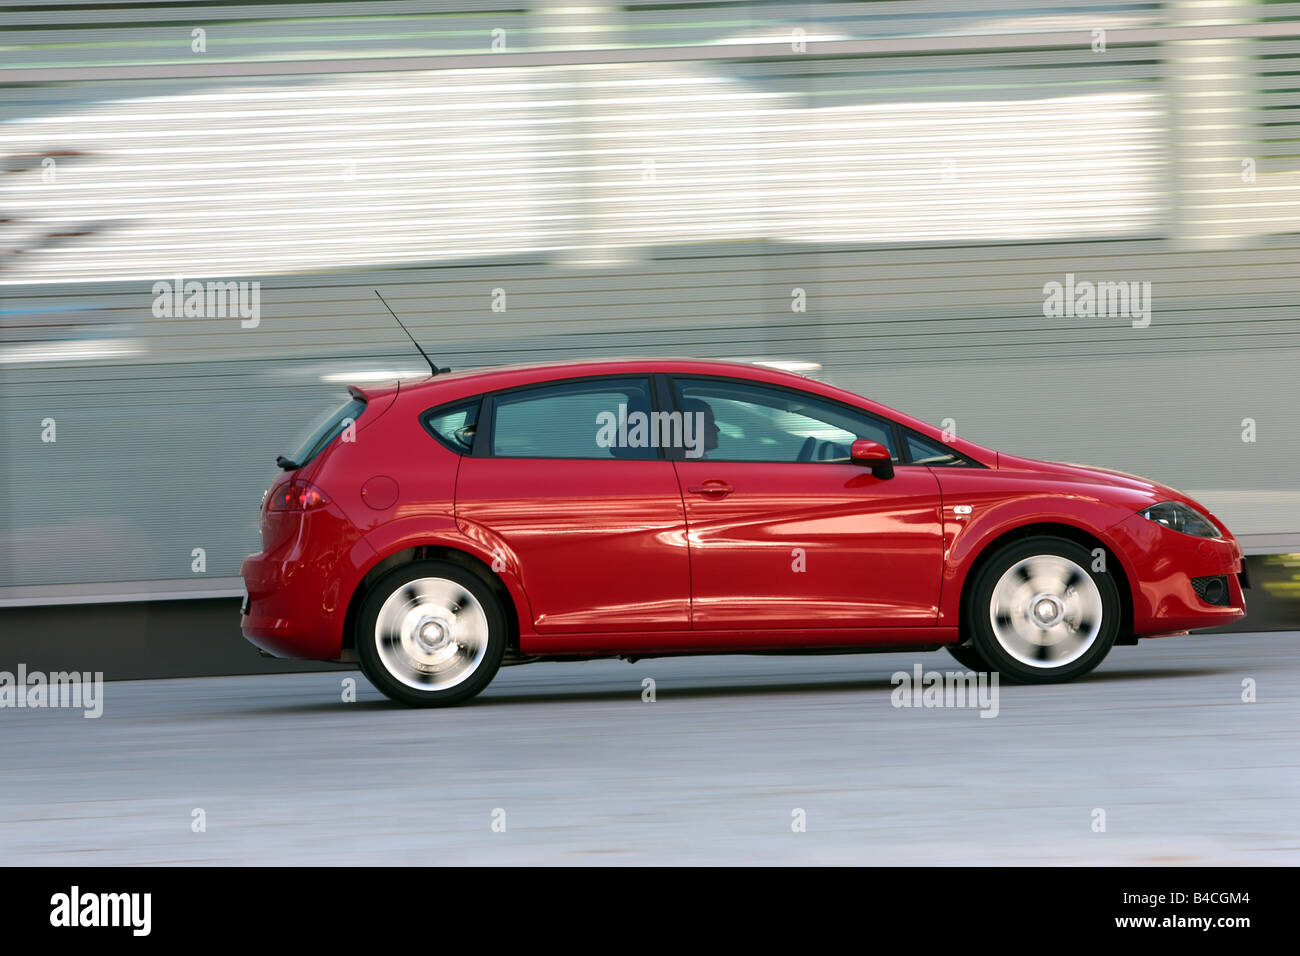 Seat Leon 2.0 FSI, model year 2005-, red, driving, side view, City Stock Photo